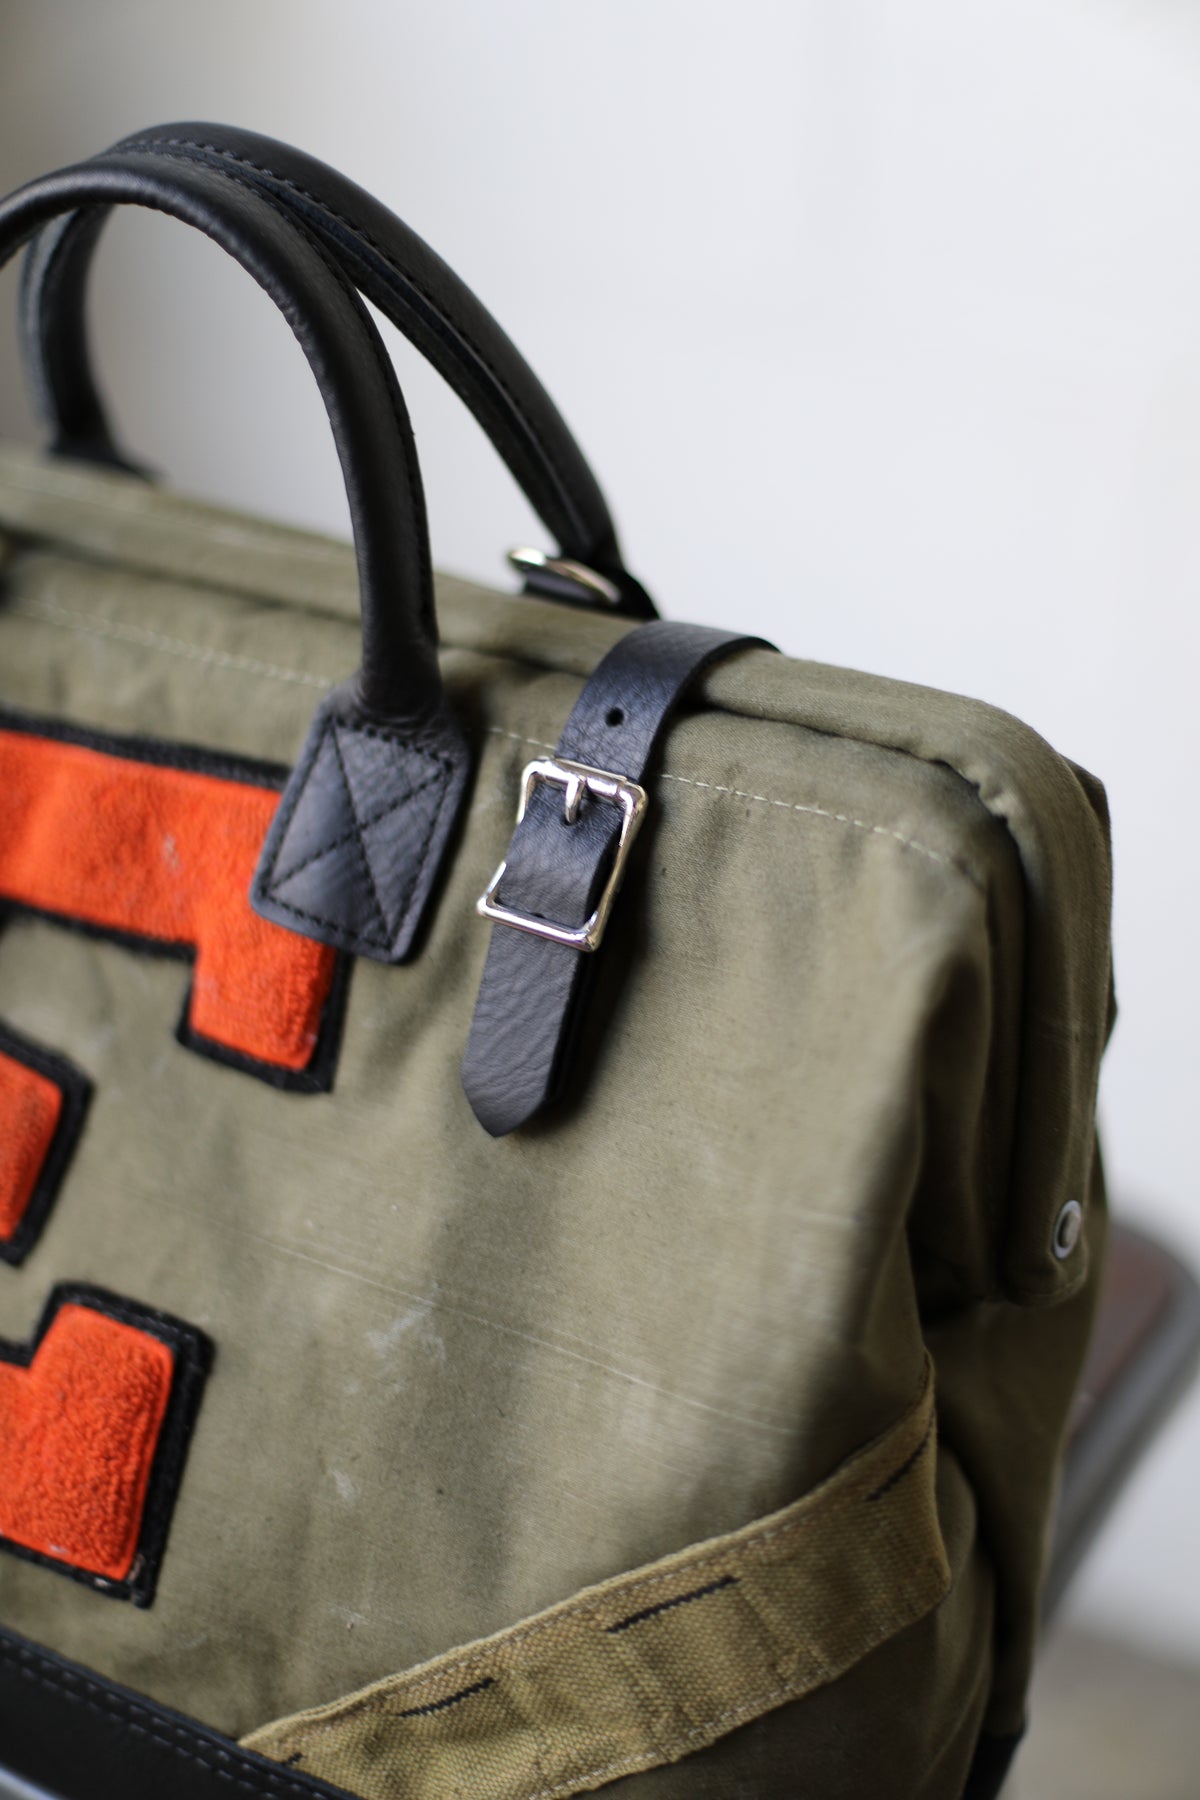 Patched WWII era Salvaged Canvas Carryall